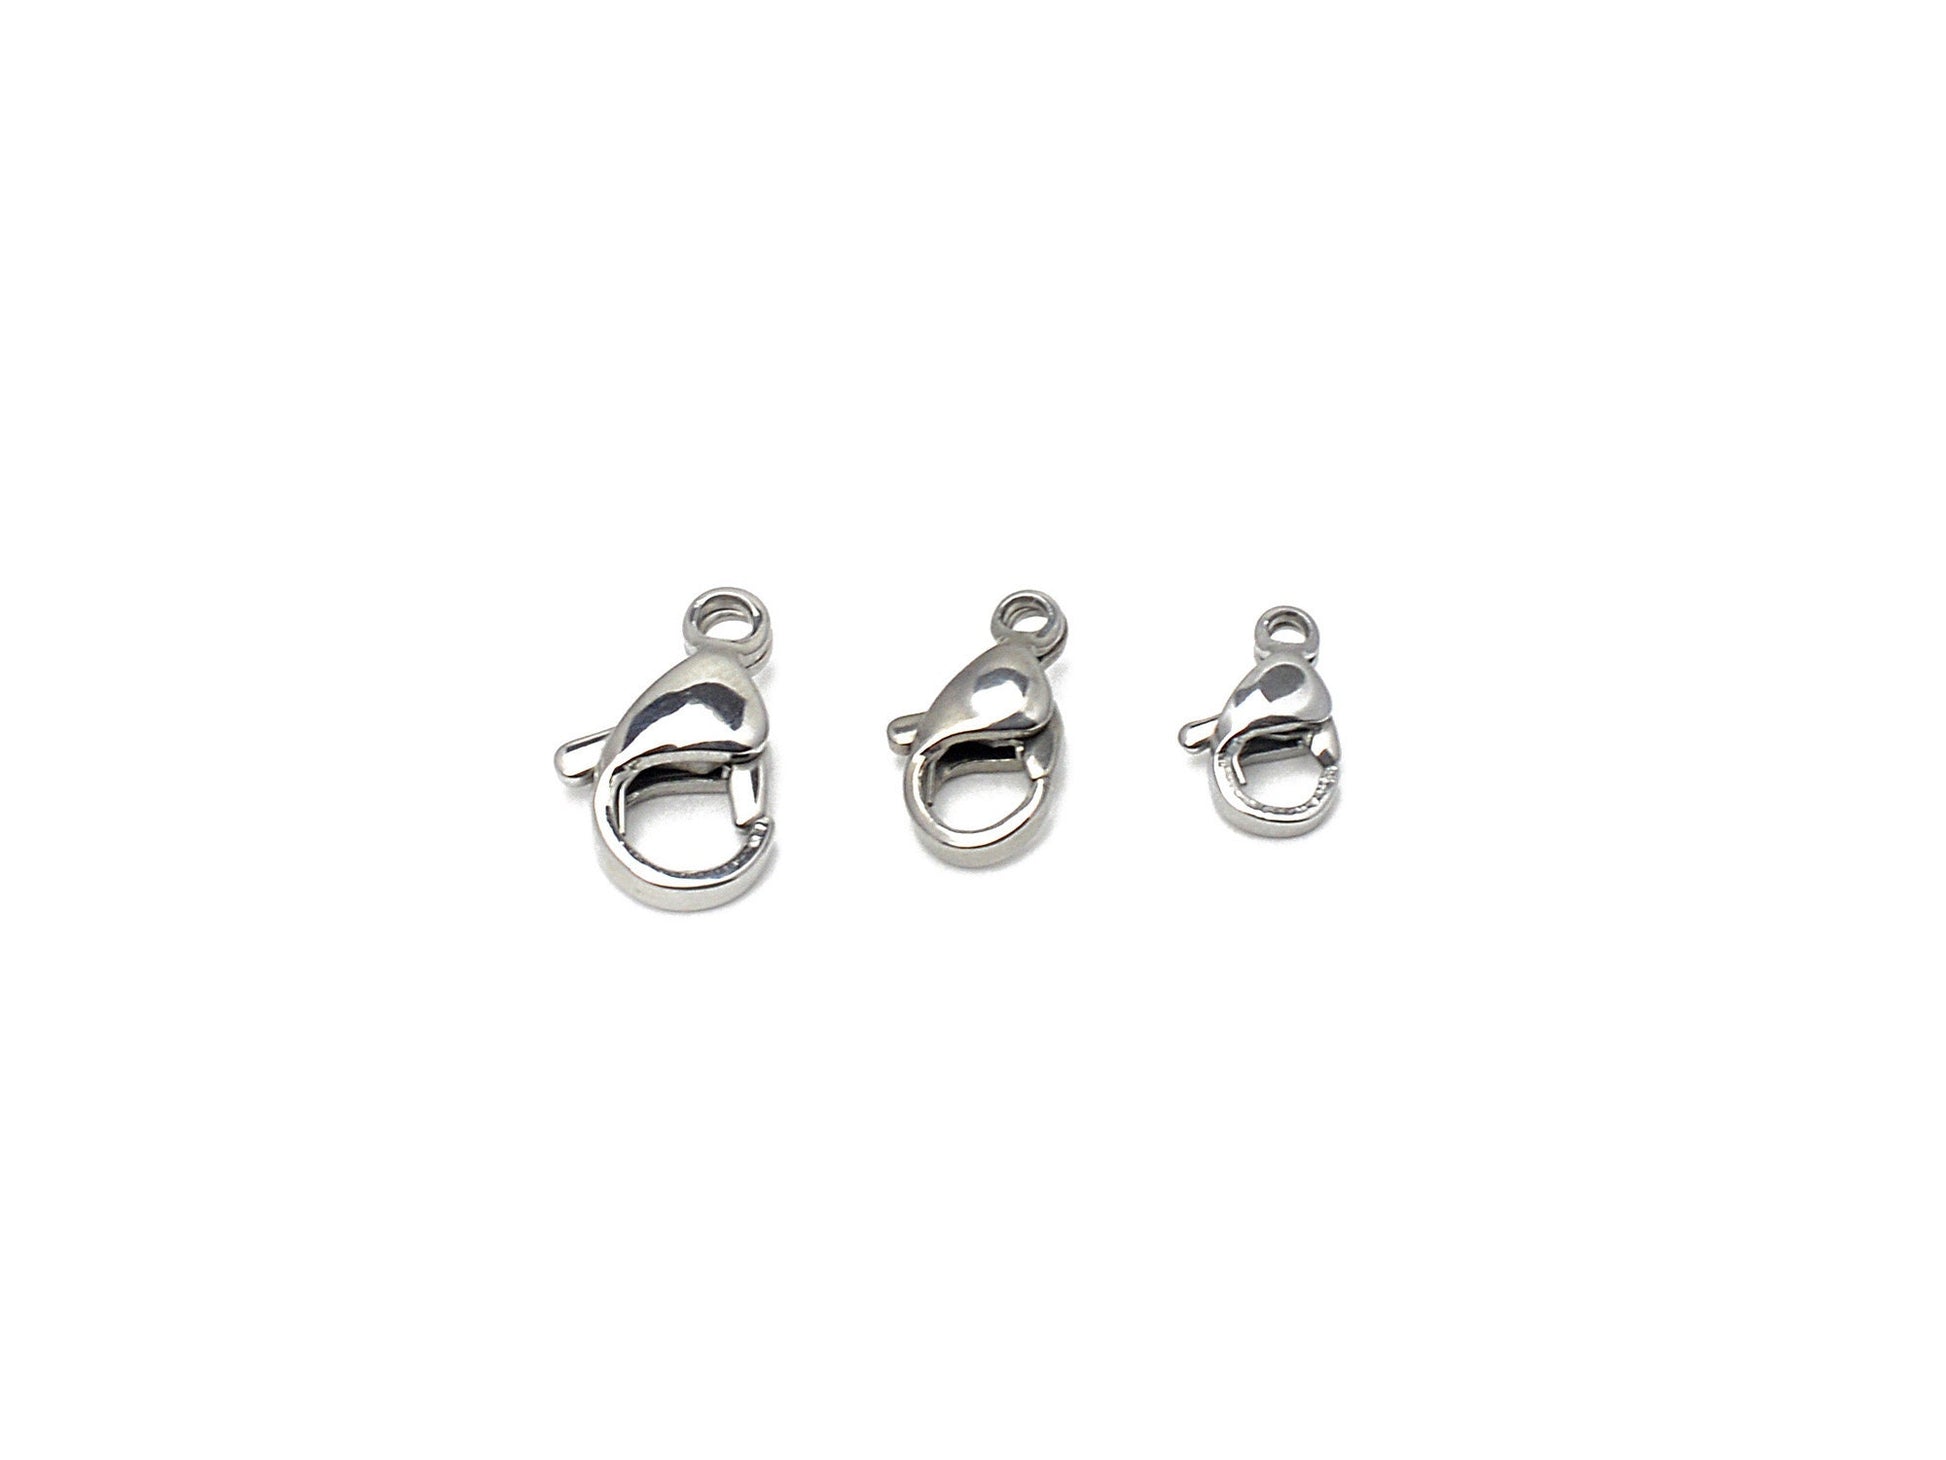 Stainless Steel Lobster Clasp 12PCs/Bag different Sizes 9x5mm/11x6mm/11x5mm/13x6mm/13x8mm/15x7mm Jewelry Finding Parts For Jewelry Making